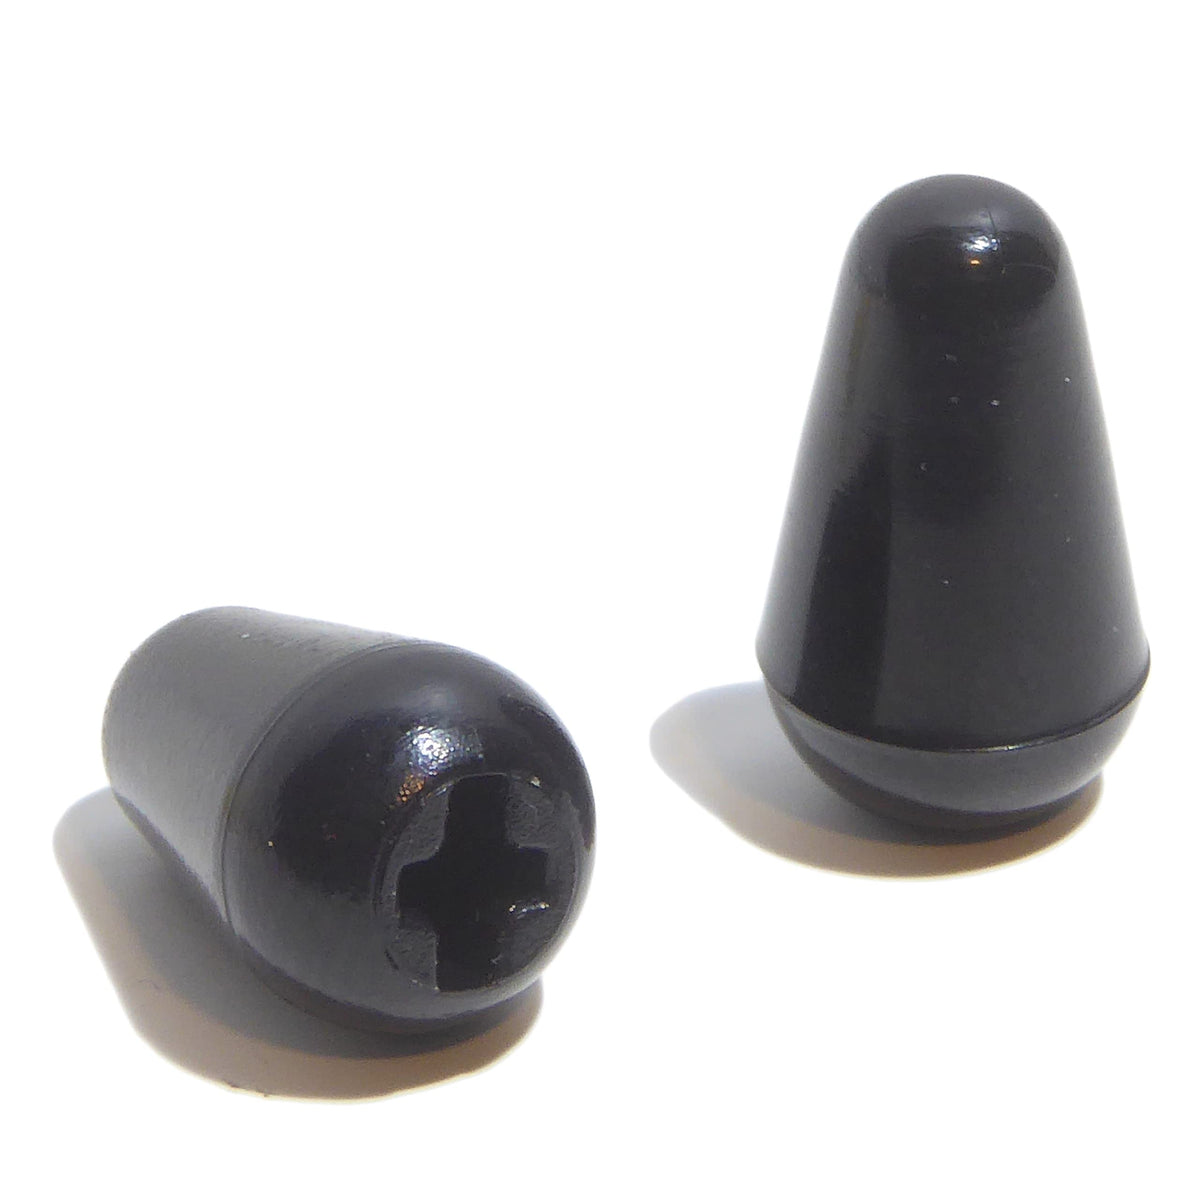 2x Guitar switch tip Black 3.5mm and 4.9mm slot Stratocaster knob